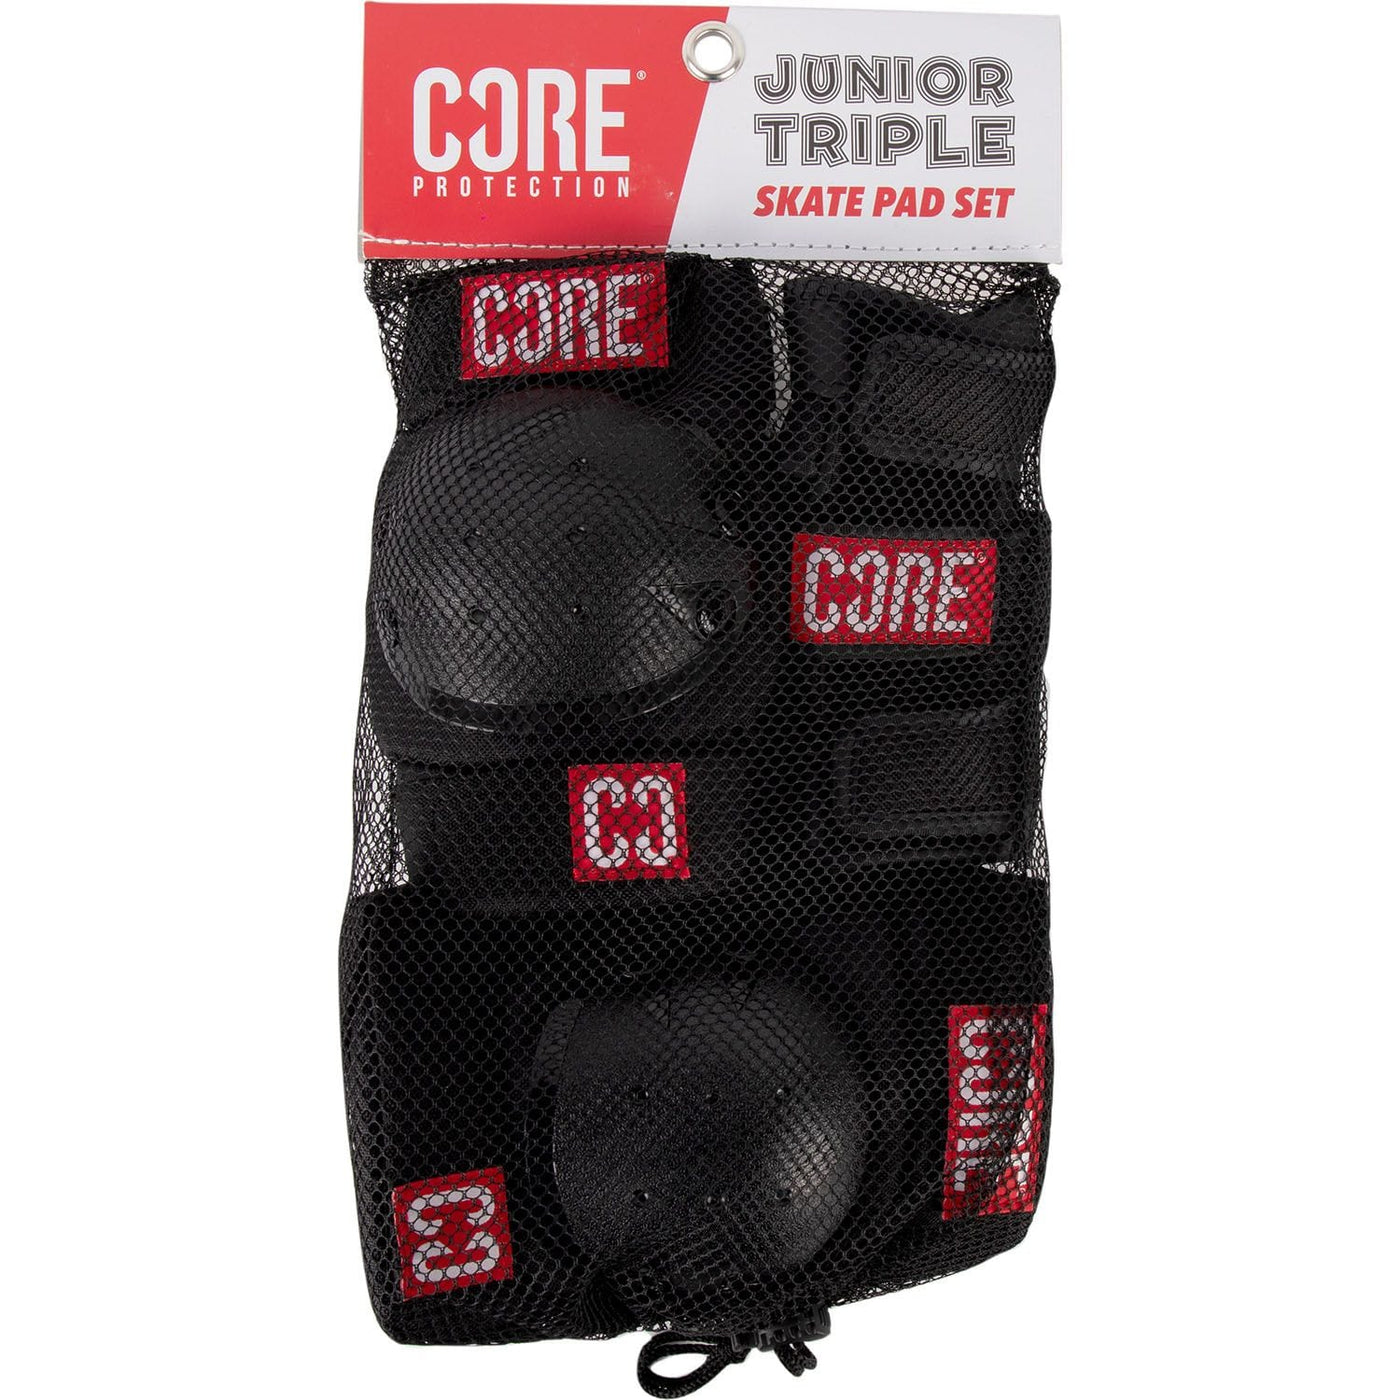 CORE Protection Junior Tripple Pad Set Knee/Elbow/Wrist I Skateboard Protective Gear Packaging